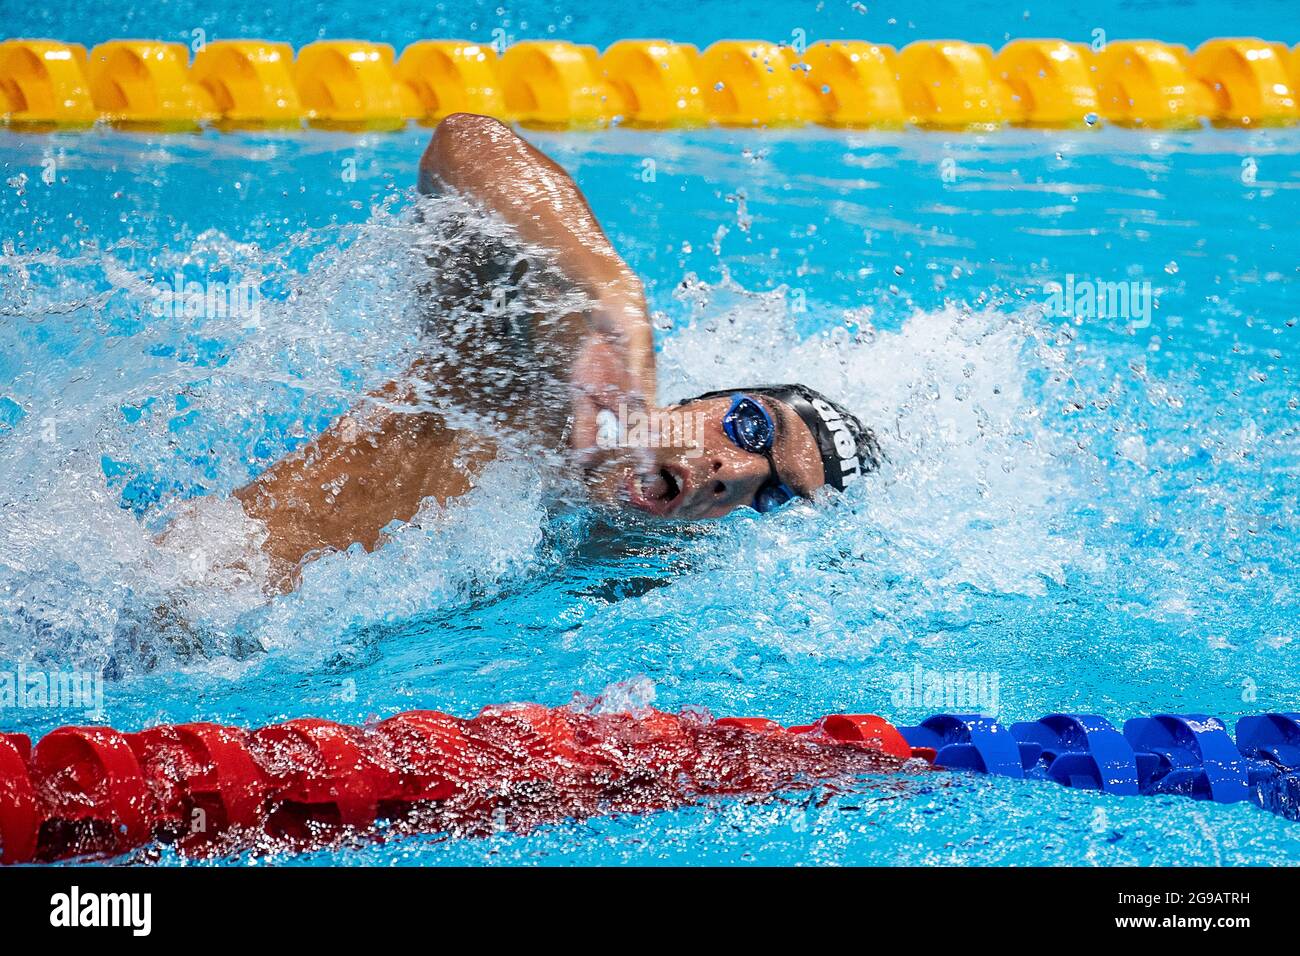 Henning Bennett MUEHLLEITNER (Muhlleitner, GER), azione; Freestyle, 400m uomini, Finale; Nuoto il 07/25/2021; Olimpiadi estive 2020, dal 23.07. - 08.08.2021 a Tokyo / Giappone. Foto Stock